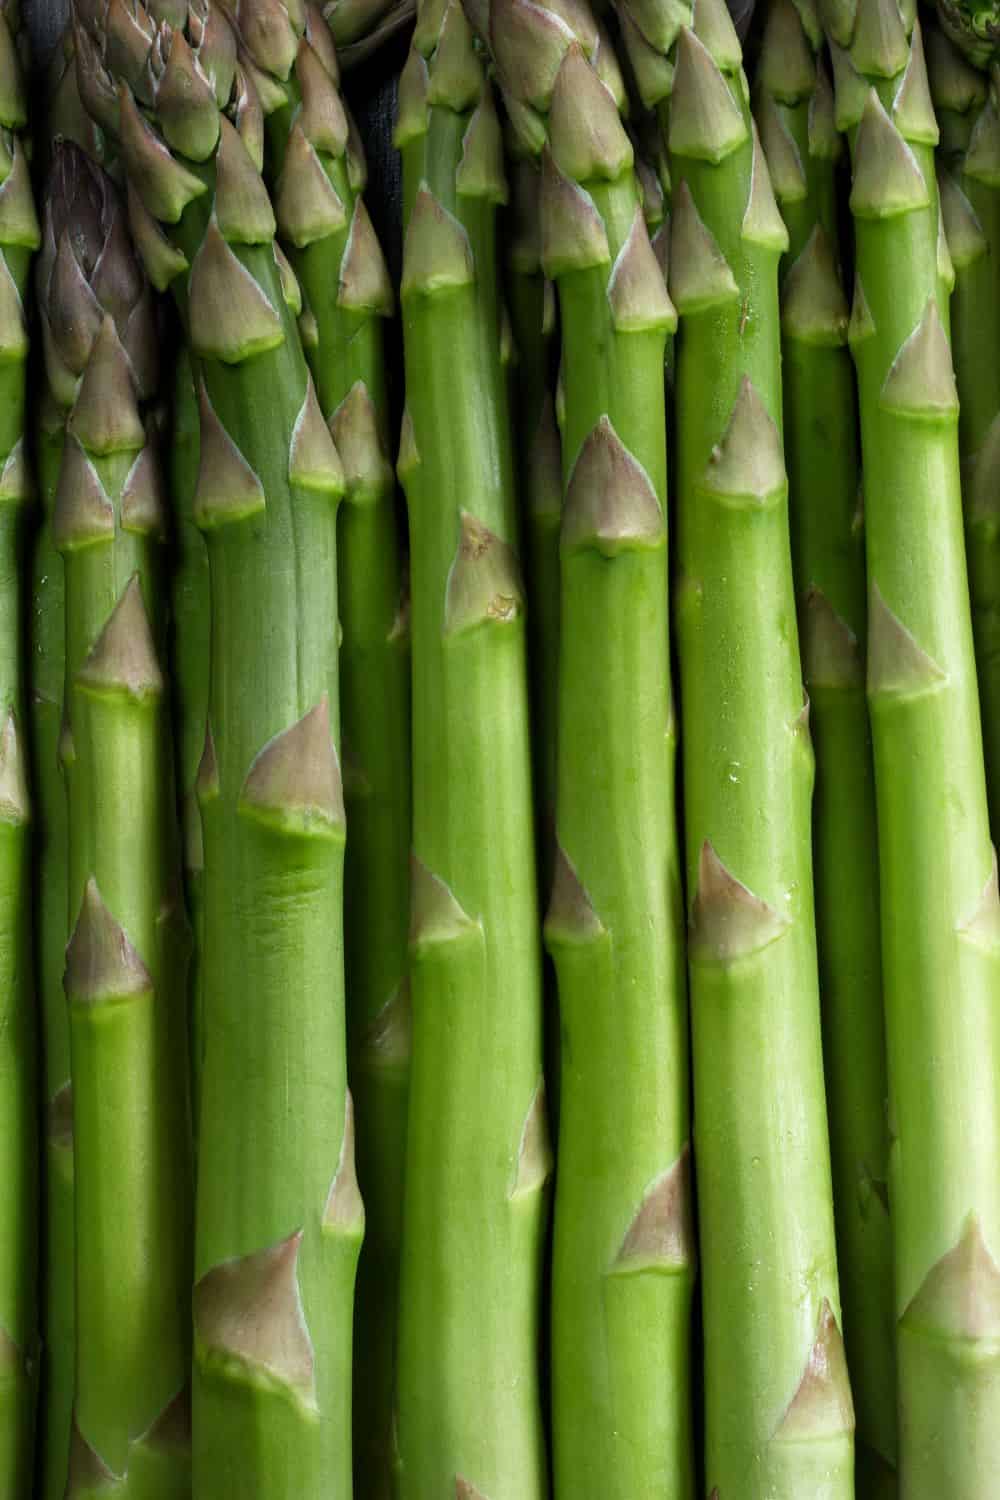 A bundle of green asparagus spears up close.